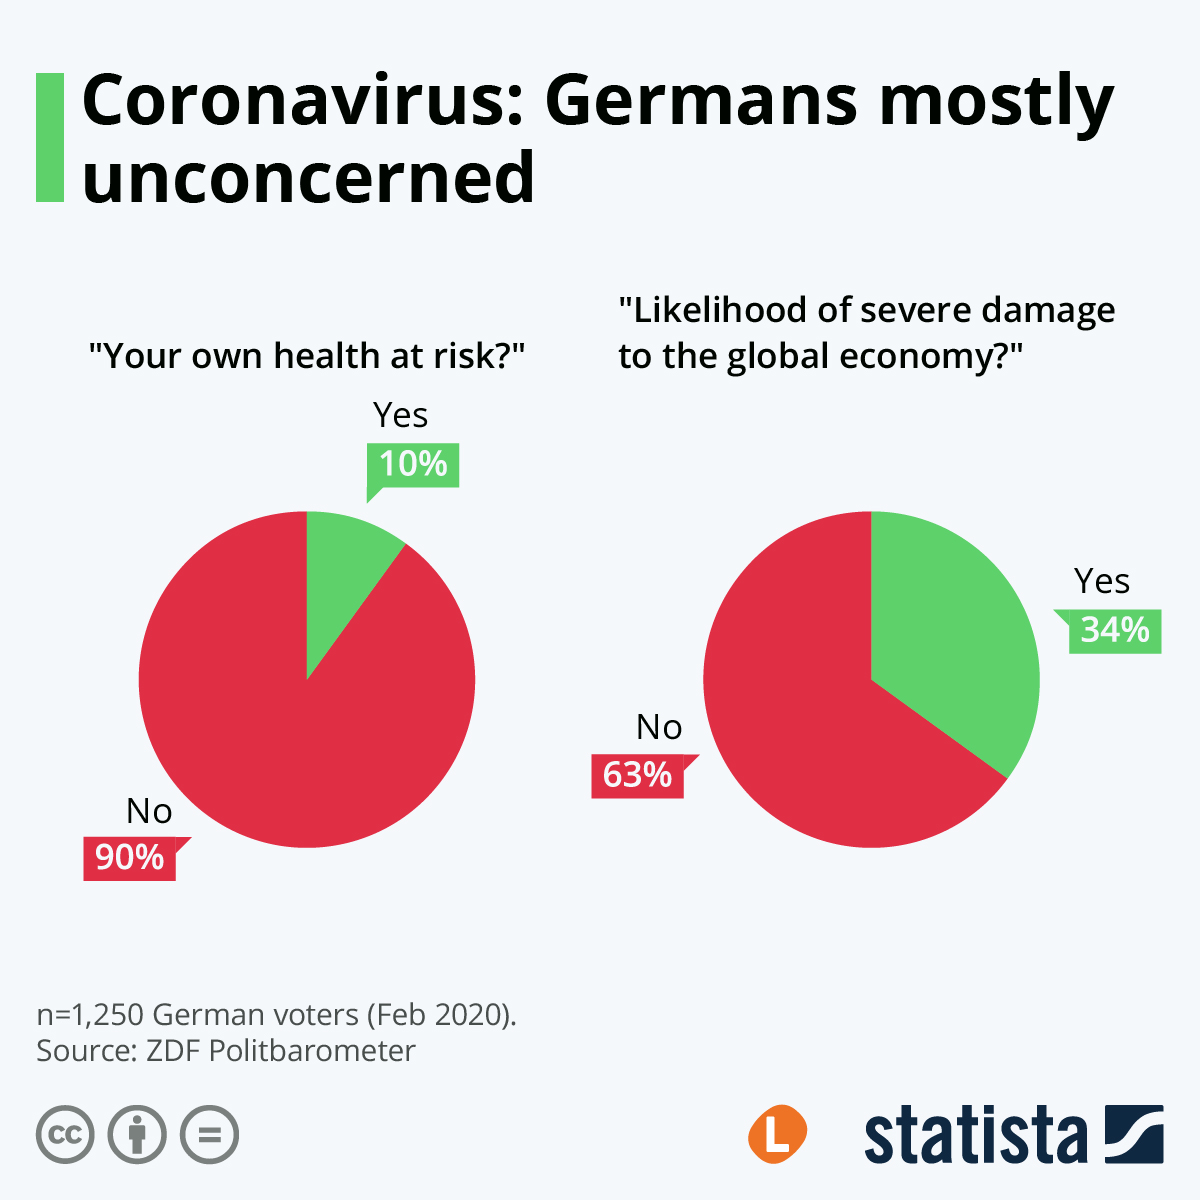 Just how worried should German residents be about the coronavirus